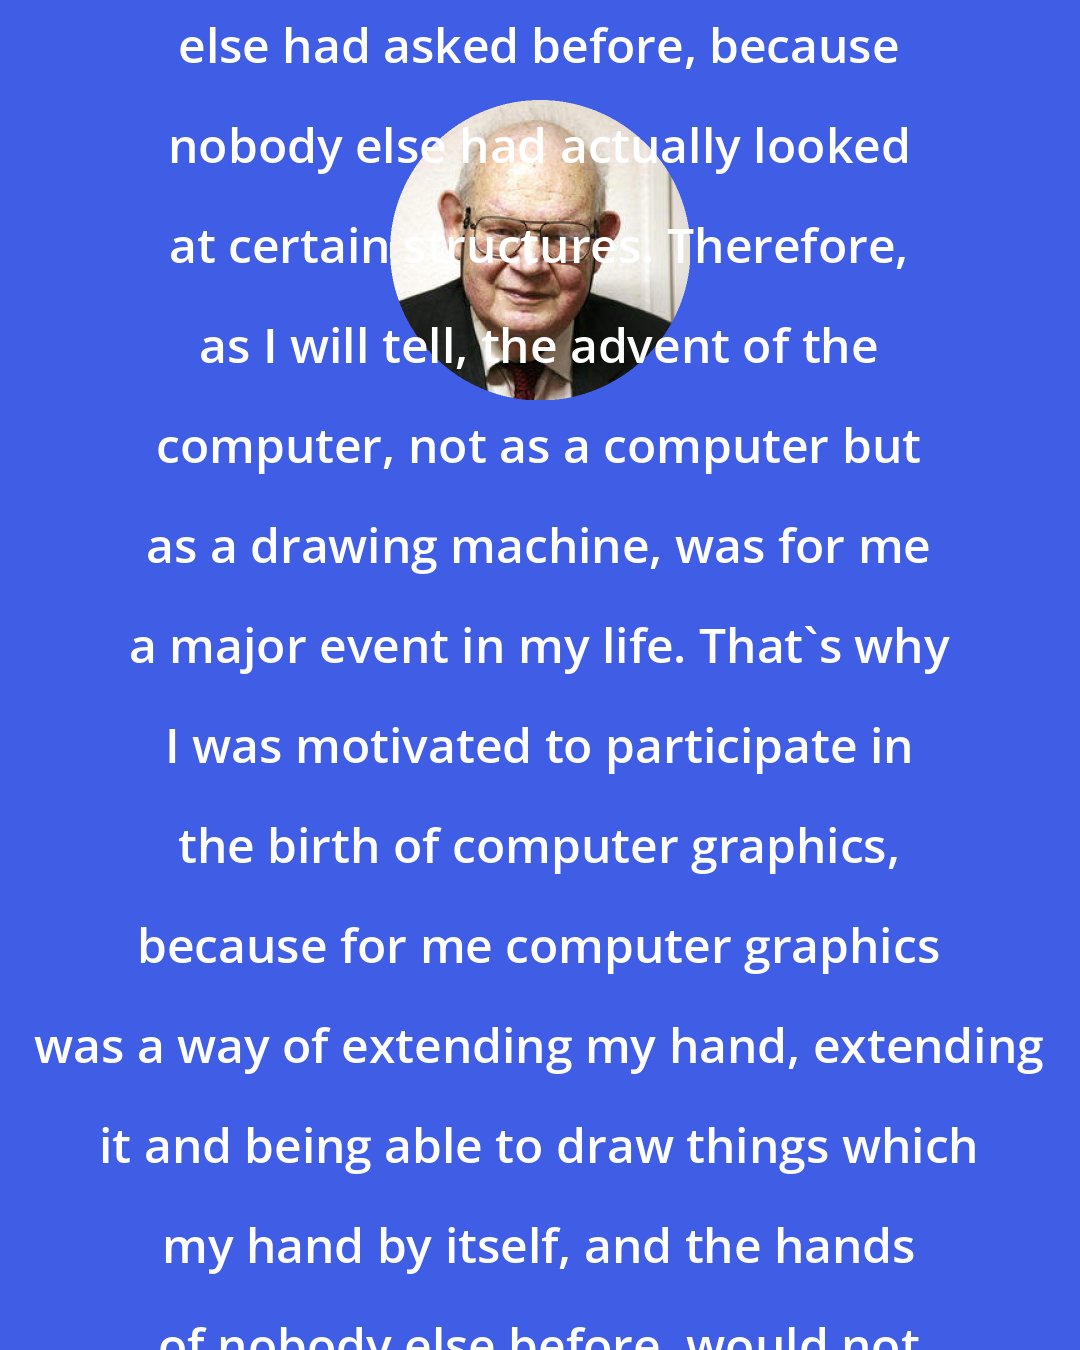 Benoit Mandelbrot: I was asking questions which nobody else had asked before, because nobody else had actually looked at certain structures. Therefore, as I will tell, the advent of the computer, not as a computer but as a drawing machine, was for me a major event in my life. That's why I was motivated to participate in the birth of computer graphics, because for me computer graphics was a way of extending my hand, extending it and being able to draw things which my hand by itself, and the hands of nobody else before, would not have been able to represent.